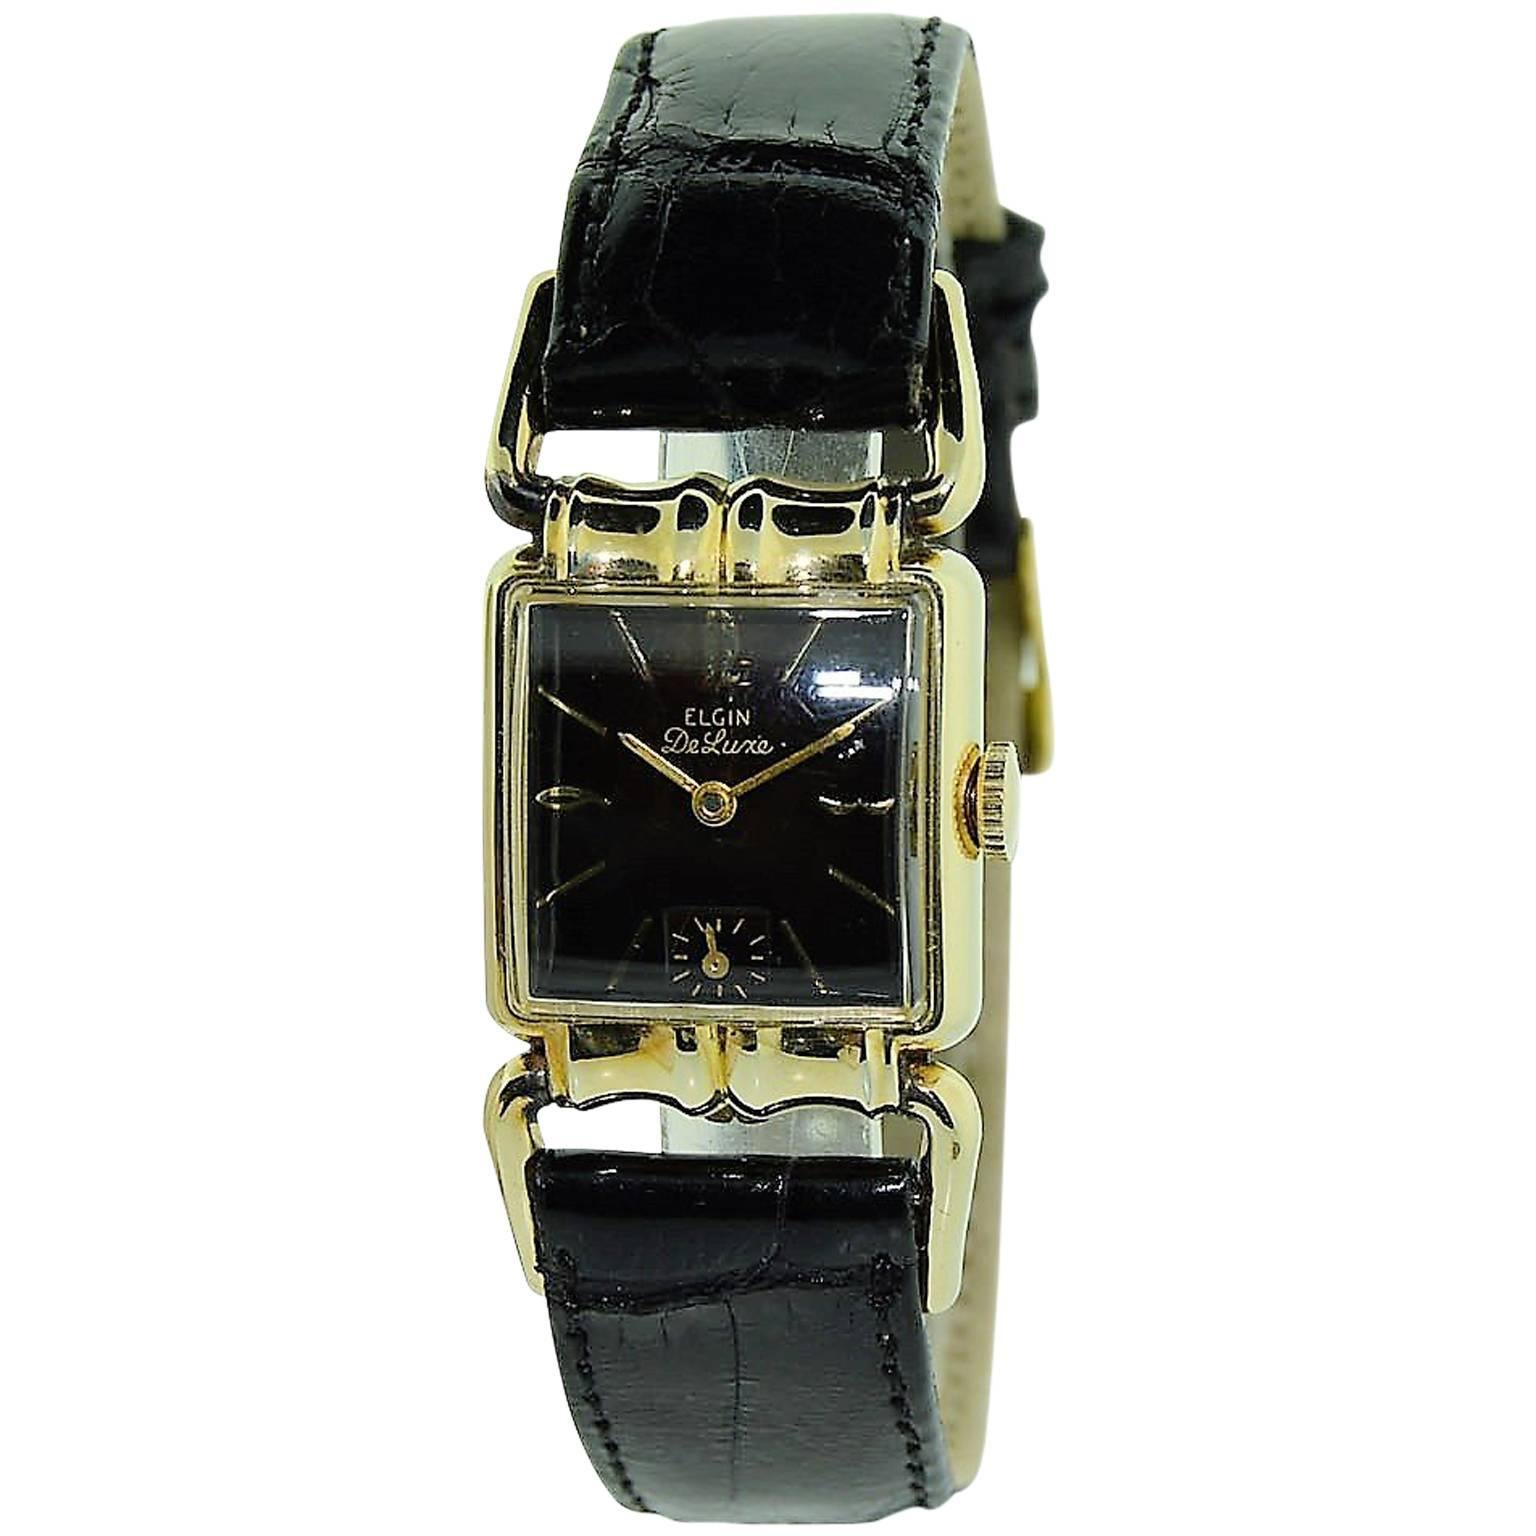 Elgin Yellow Gold Filled Art Deco Drivers Side Manual Watch, 1940's